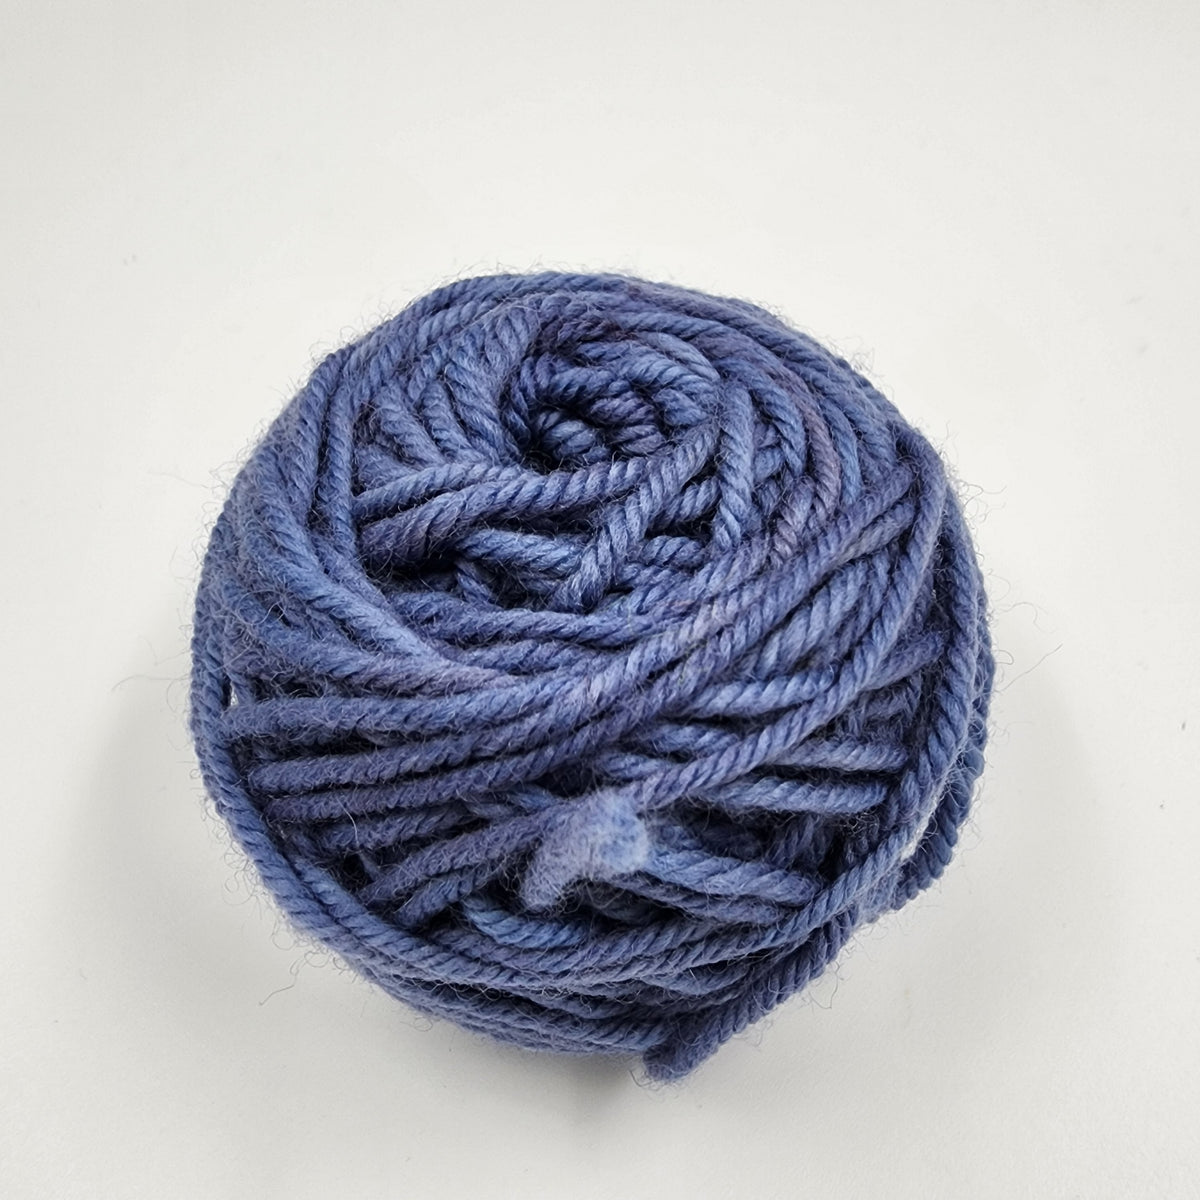 Hand-dyed Merino Wool 50gms cakes